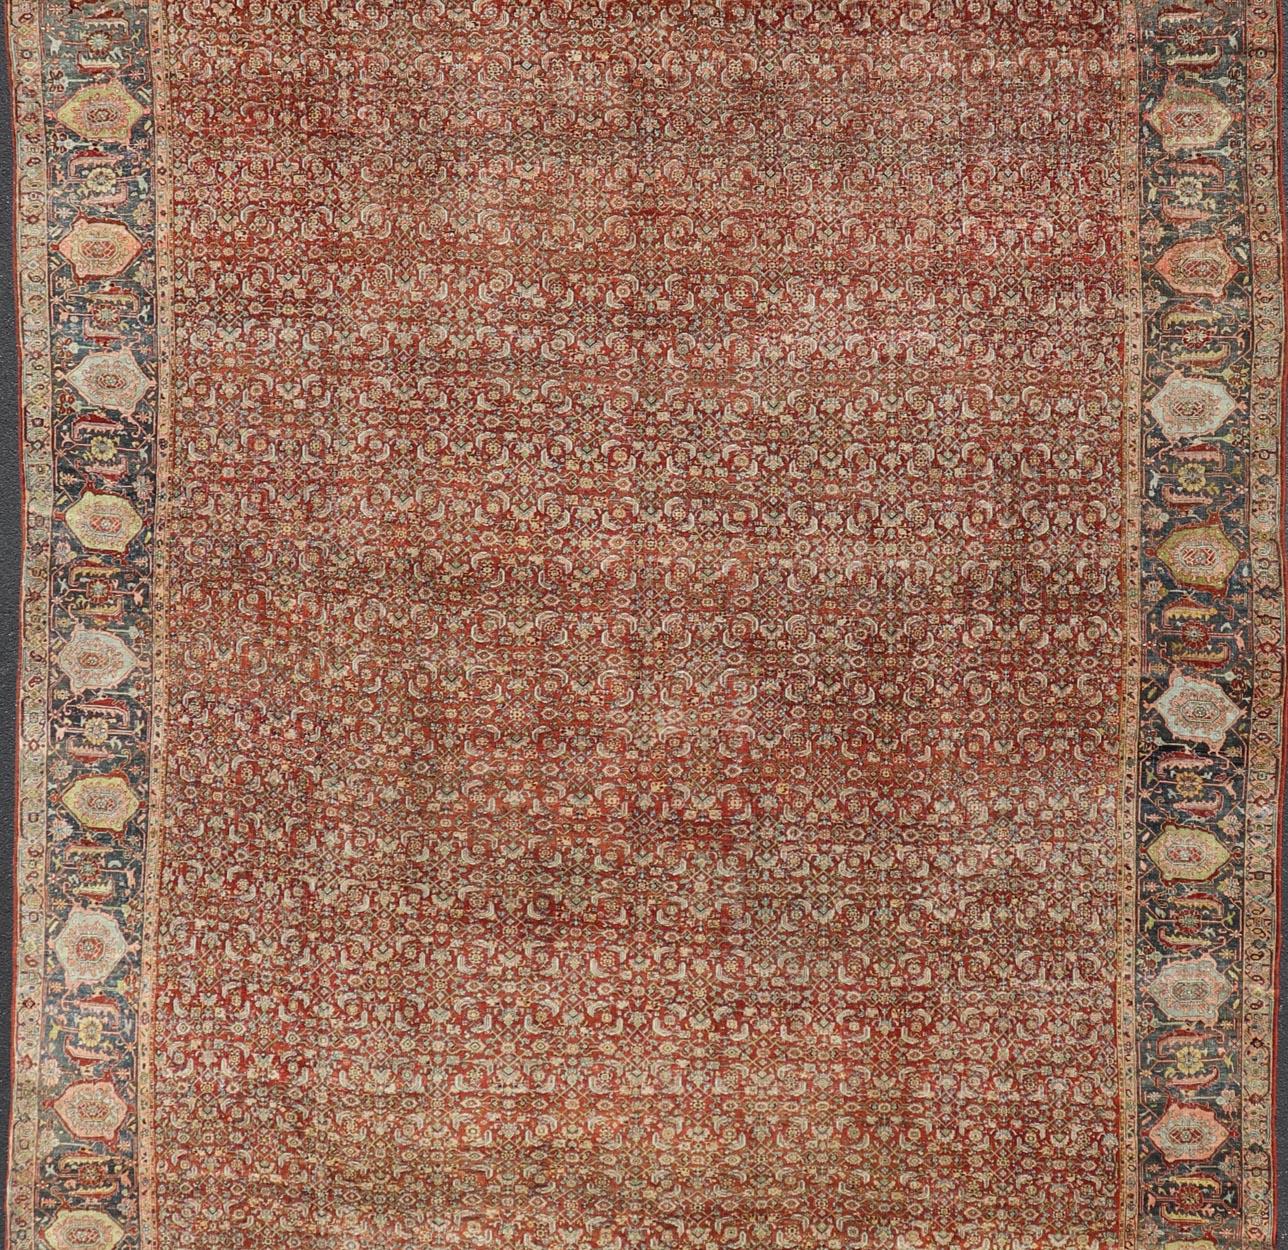 Palace Size Antique Persian Bidjar Rug in Shades of Red, Blue Grey & Lime Green For Sale 13